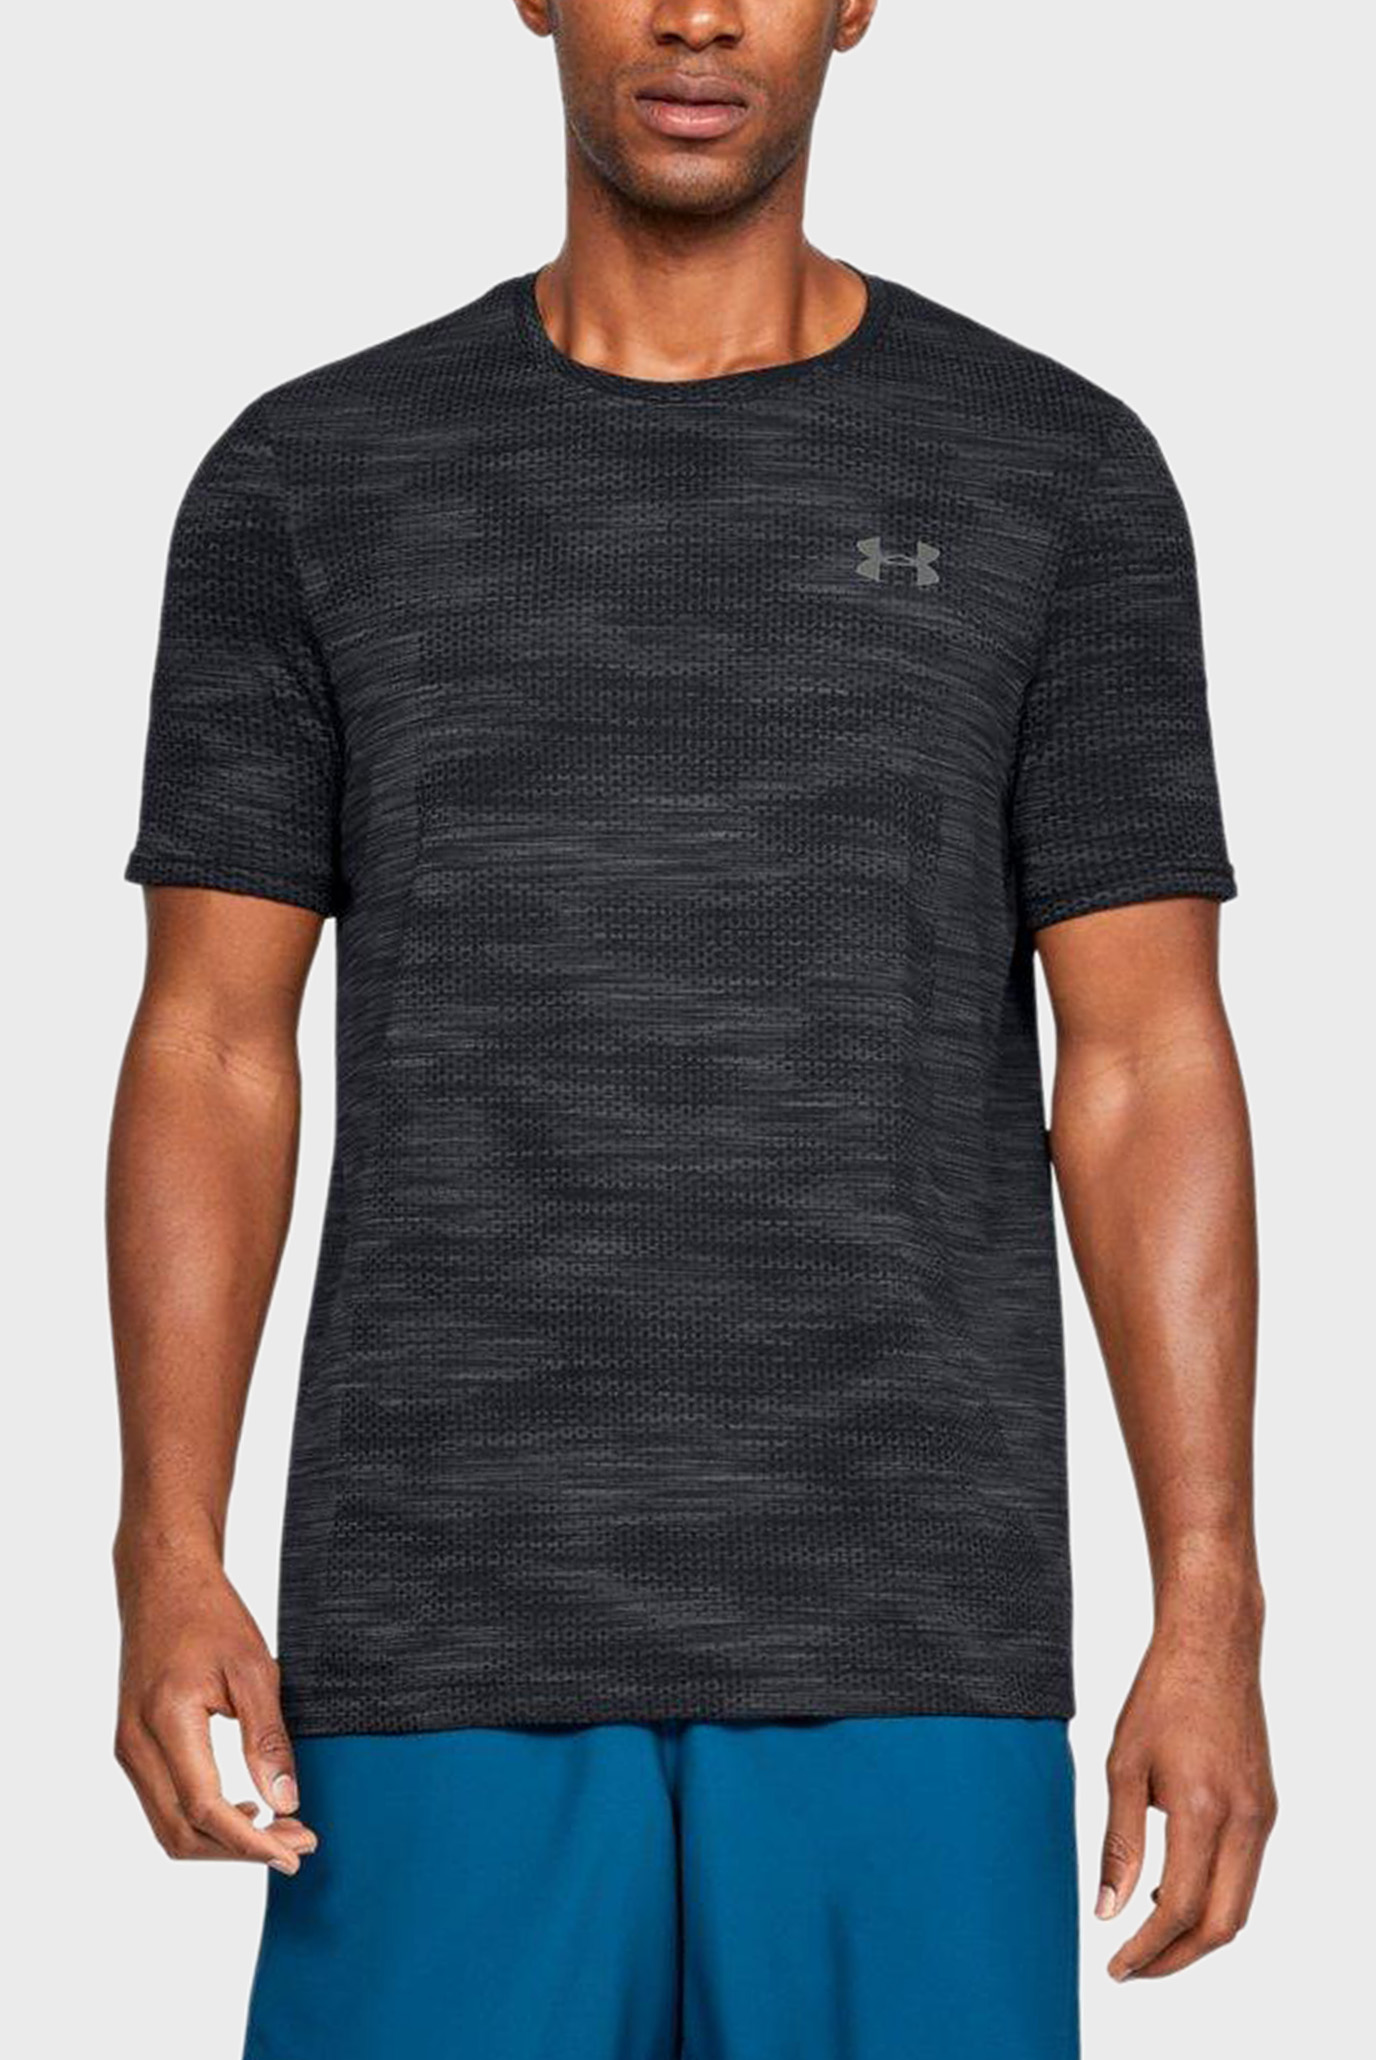 under armour siphon ss